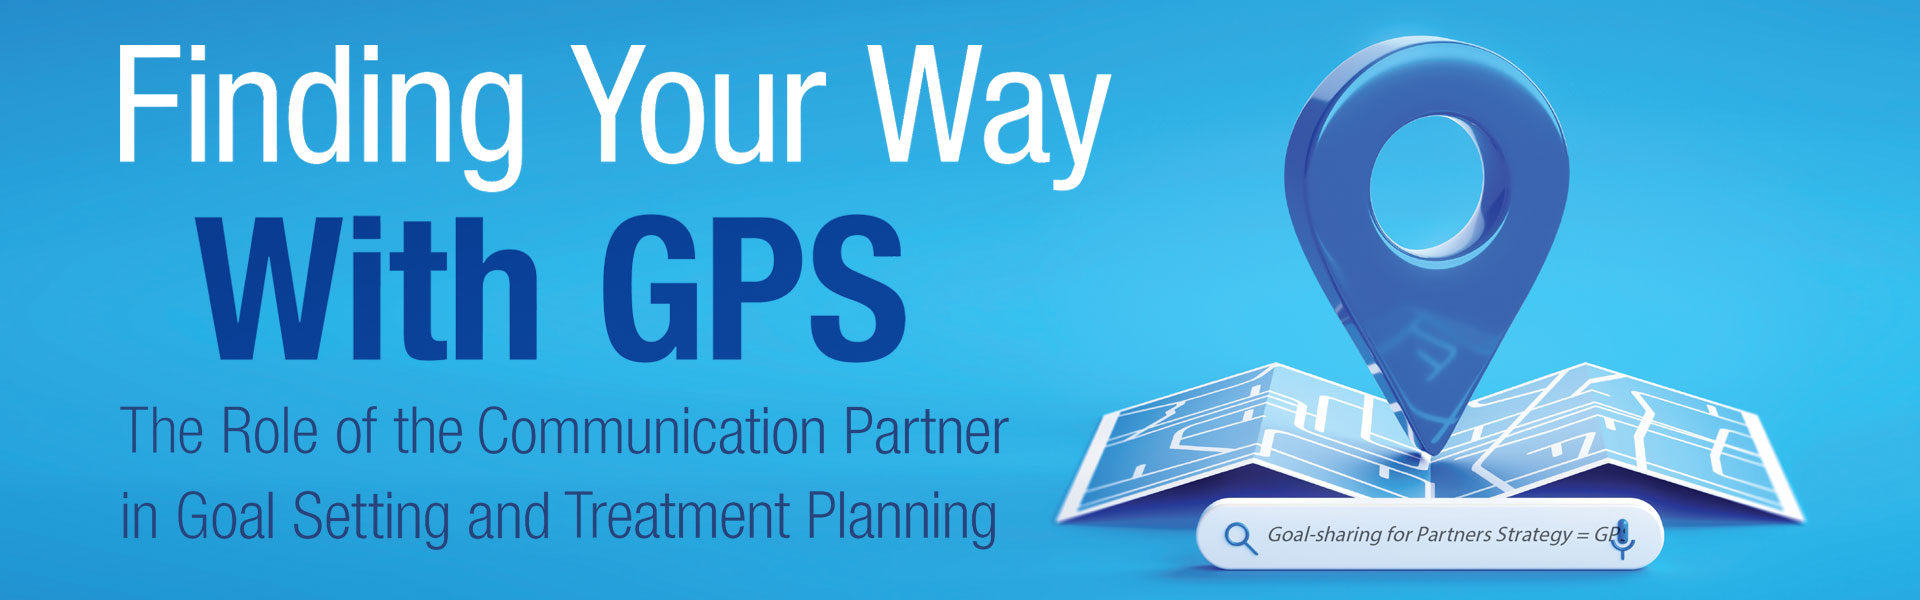 Finding Your Way With GPS: The Role of the Communication Partner in Goal Setting and Treatment Planning